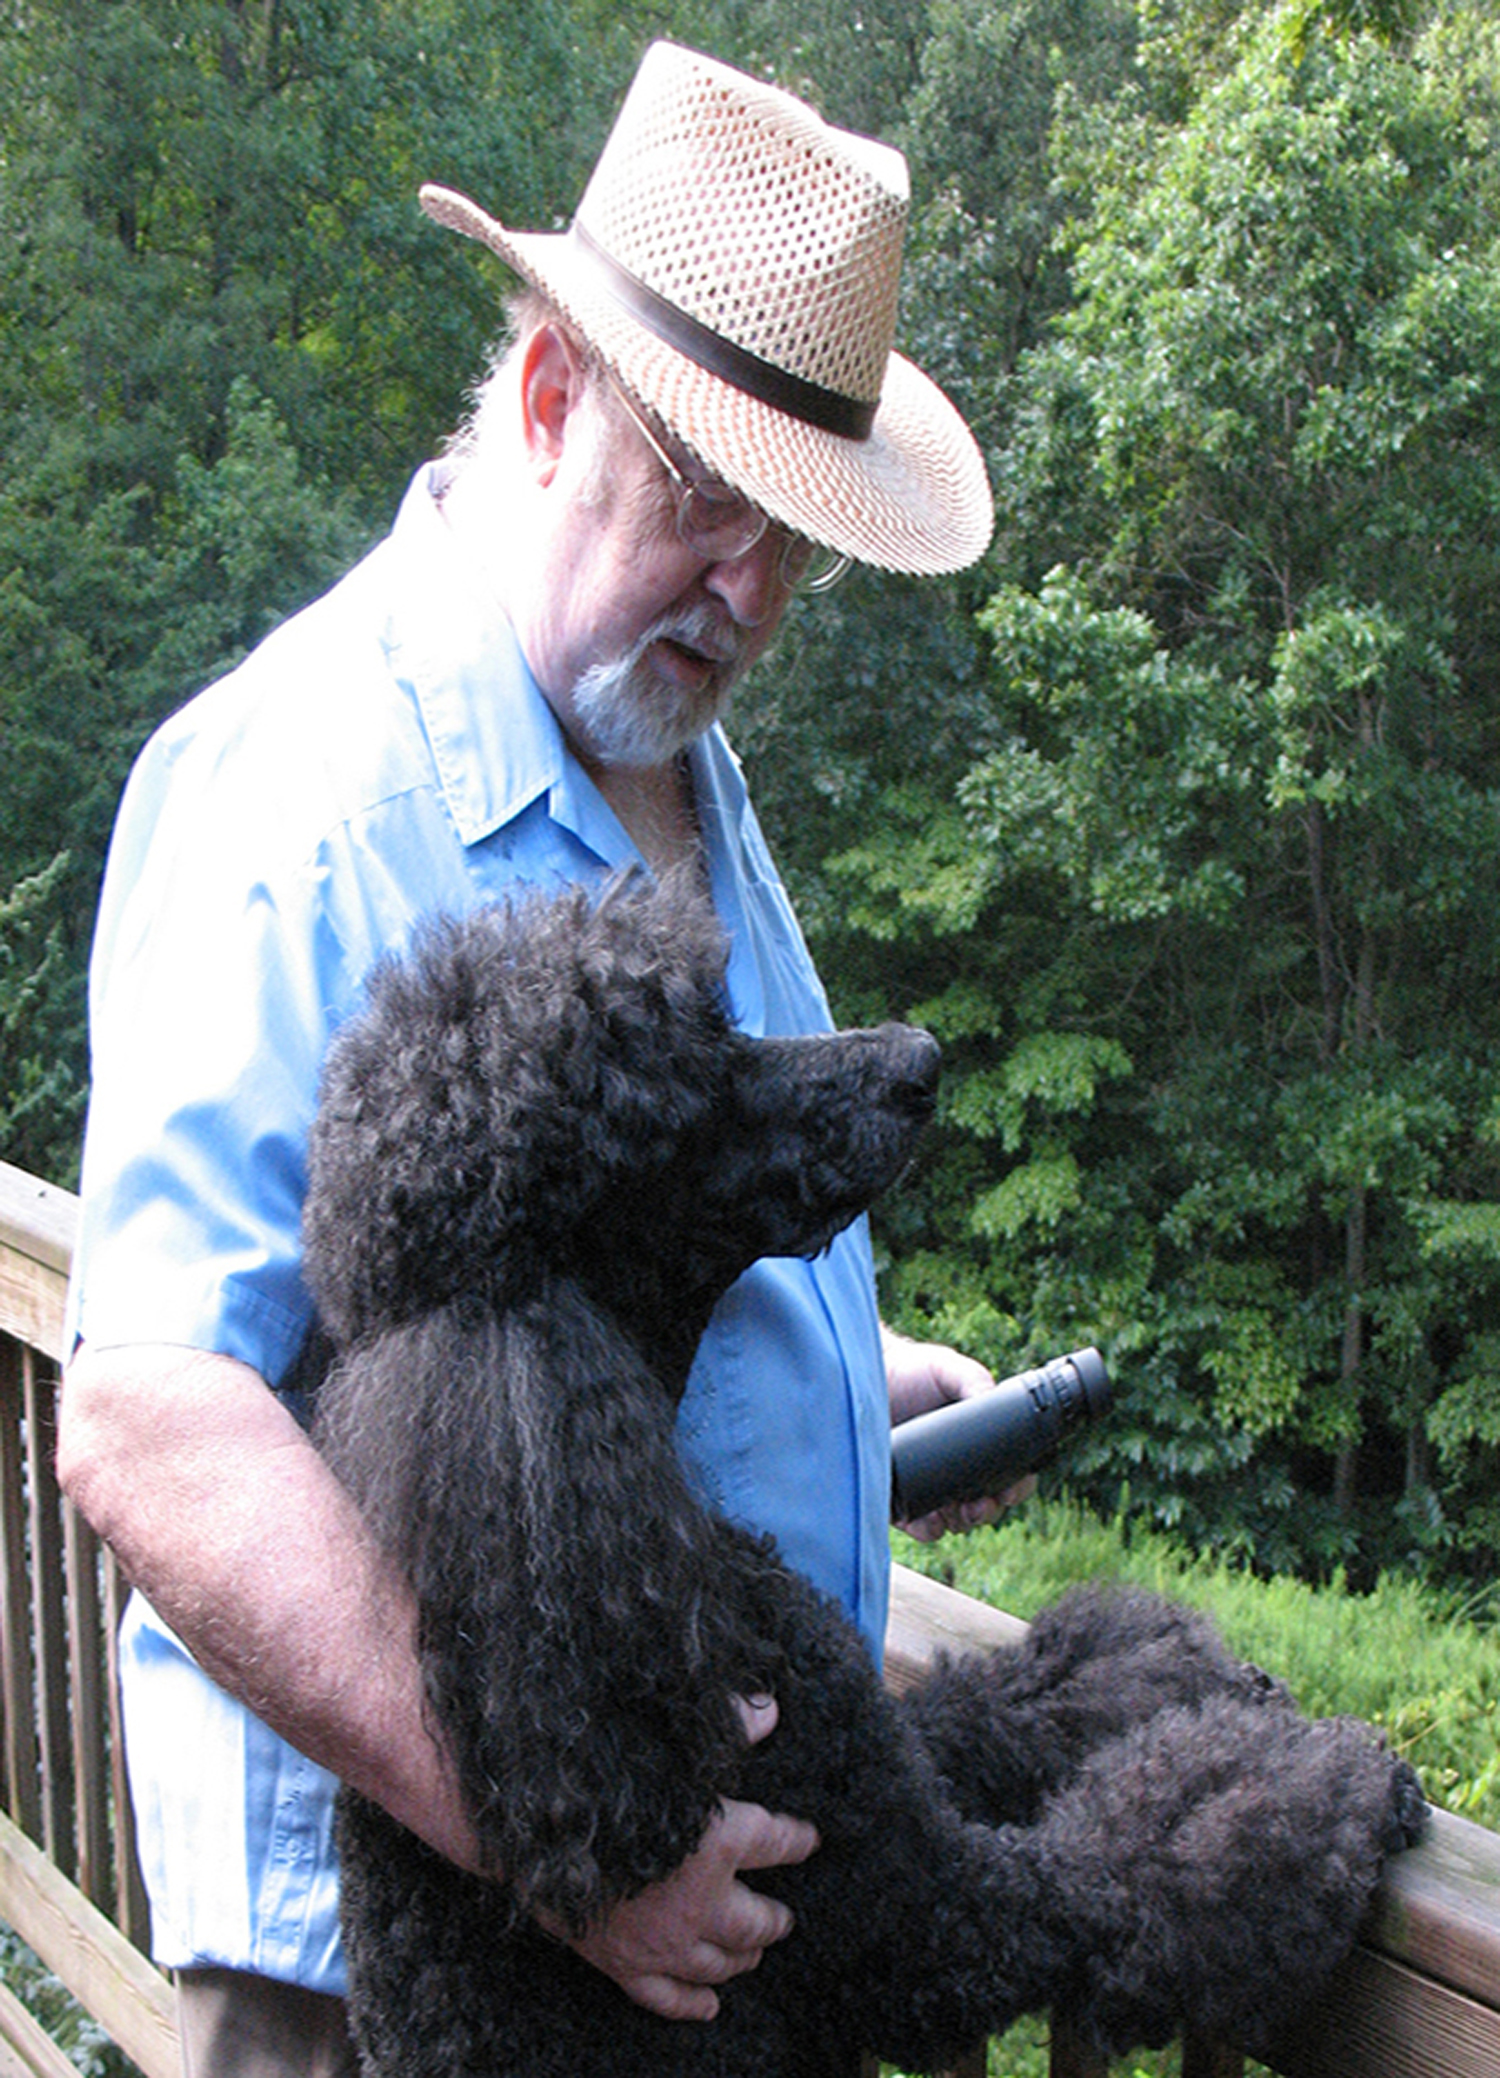 Jon Franklin with his poodle Sam